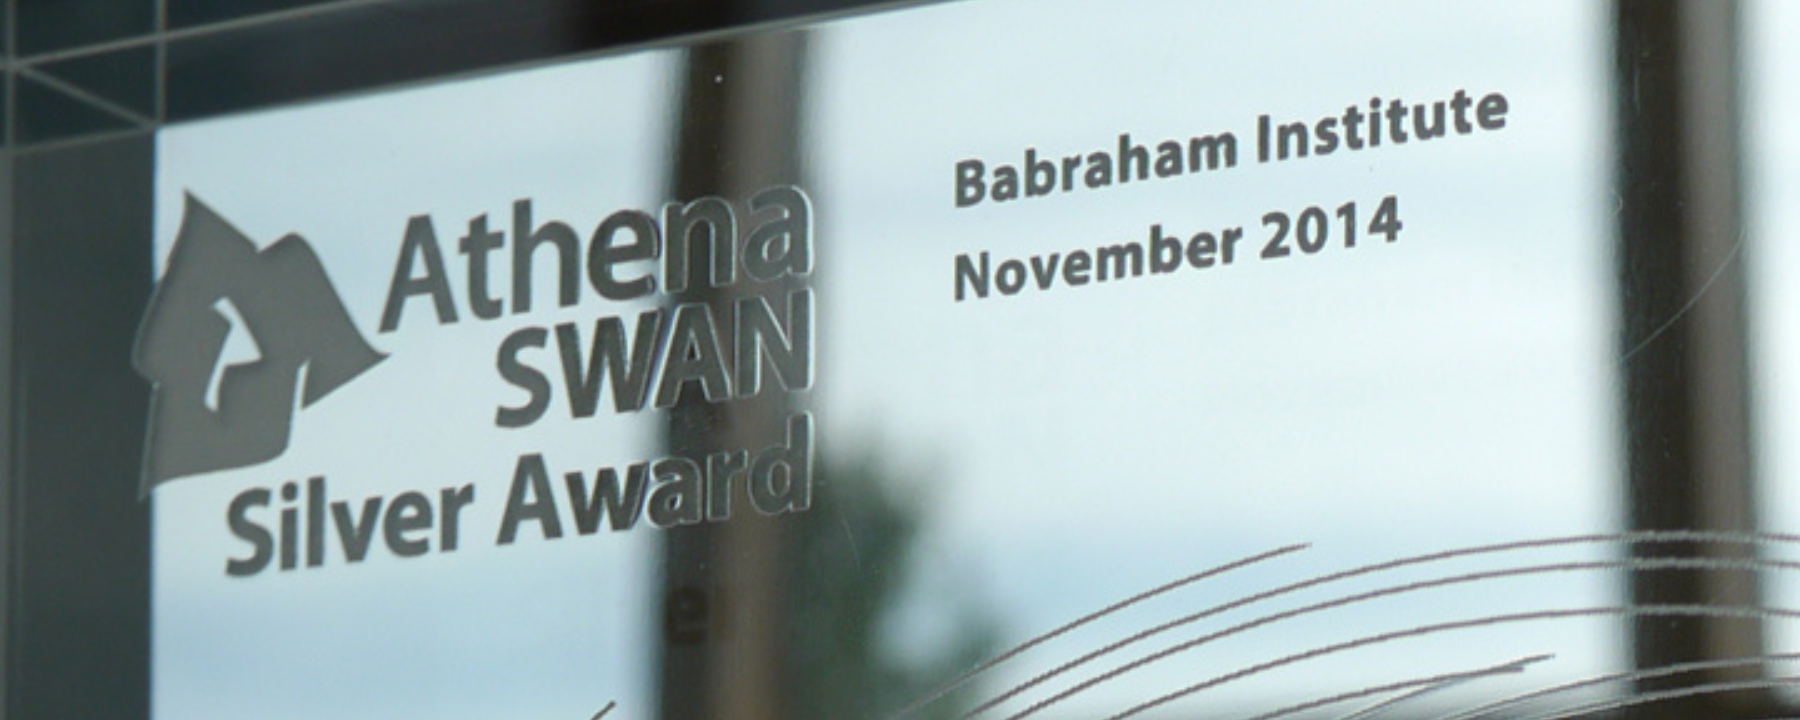 Photo of the Institute's Athena SWAN Silver Award from 2014